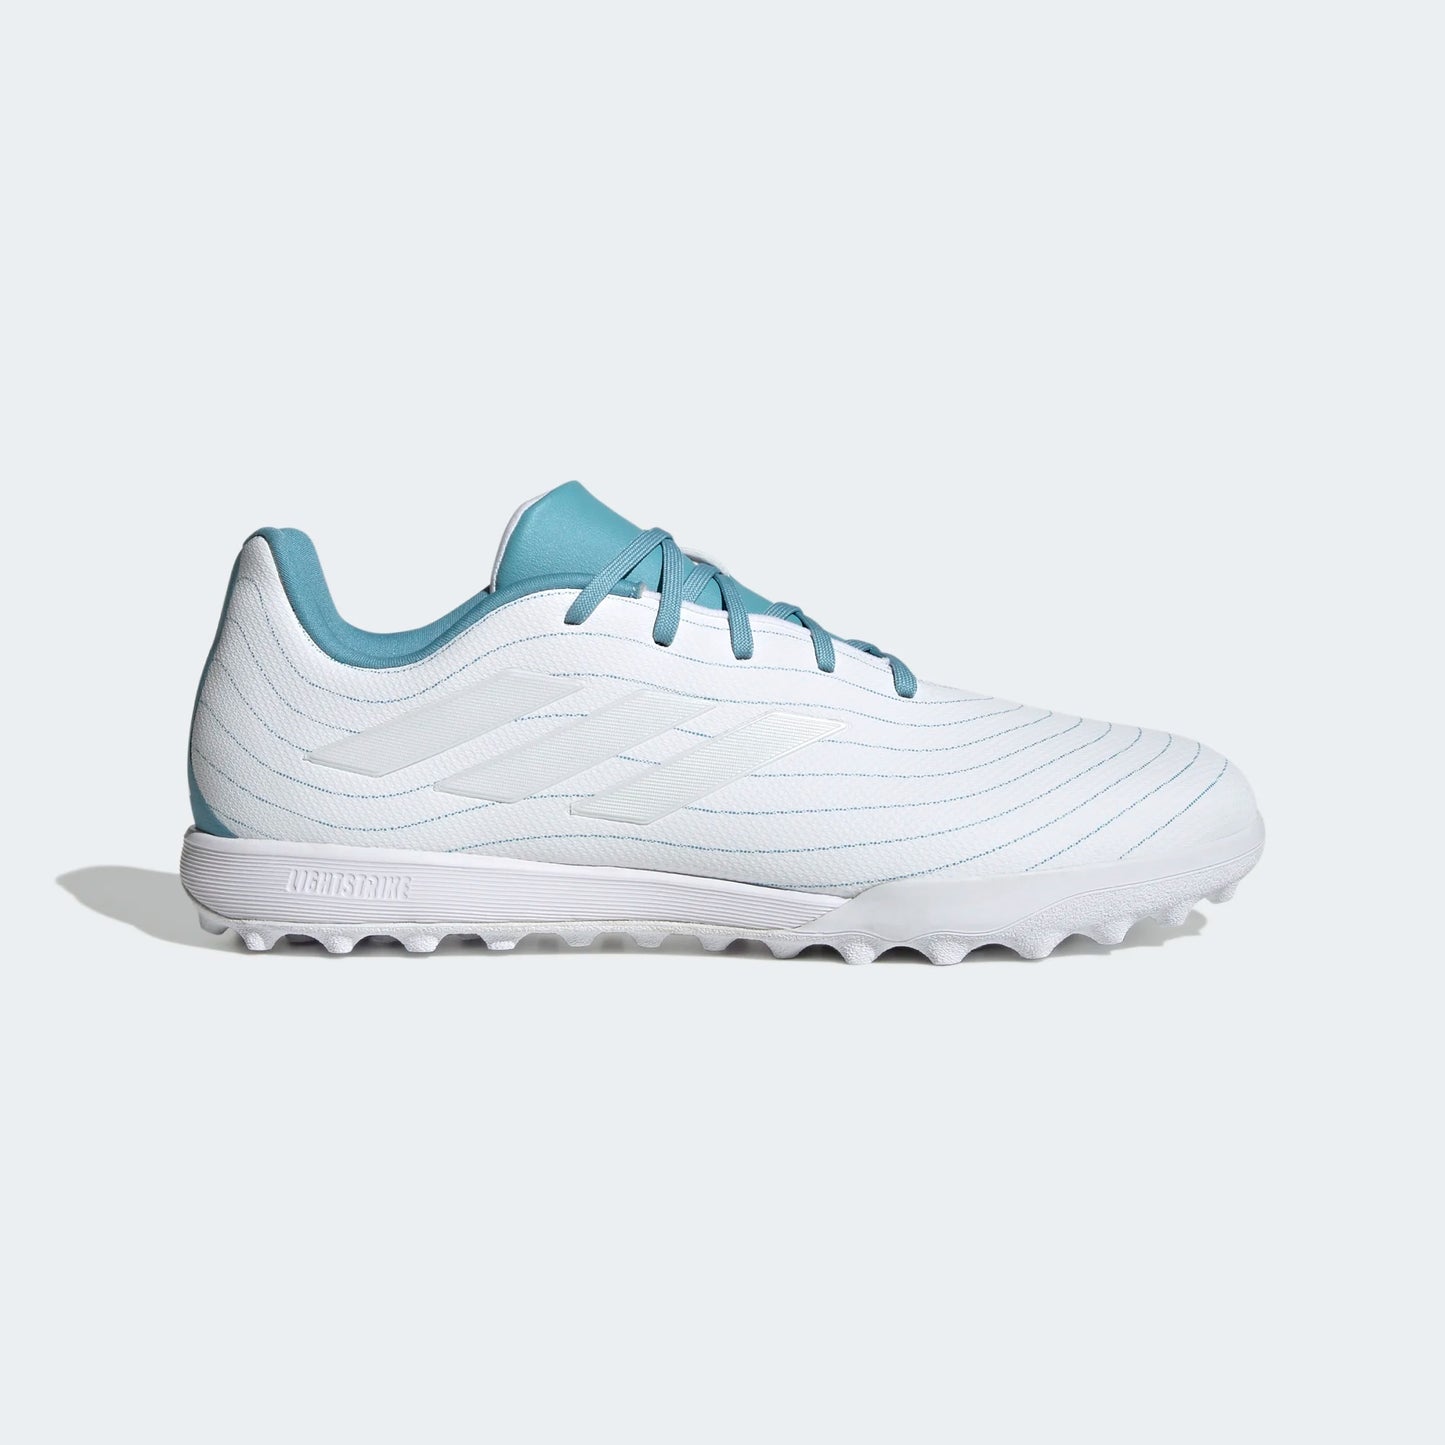 Copa Pure.3 TF [Parley]